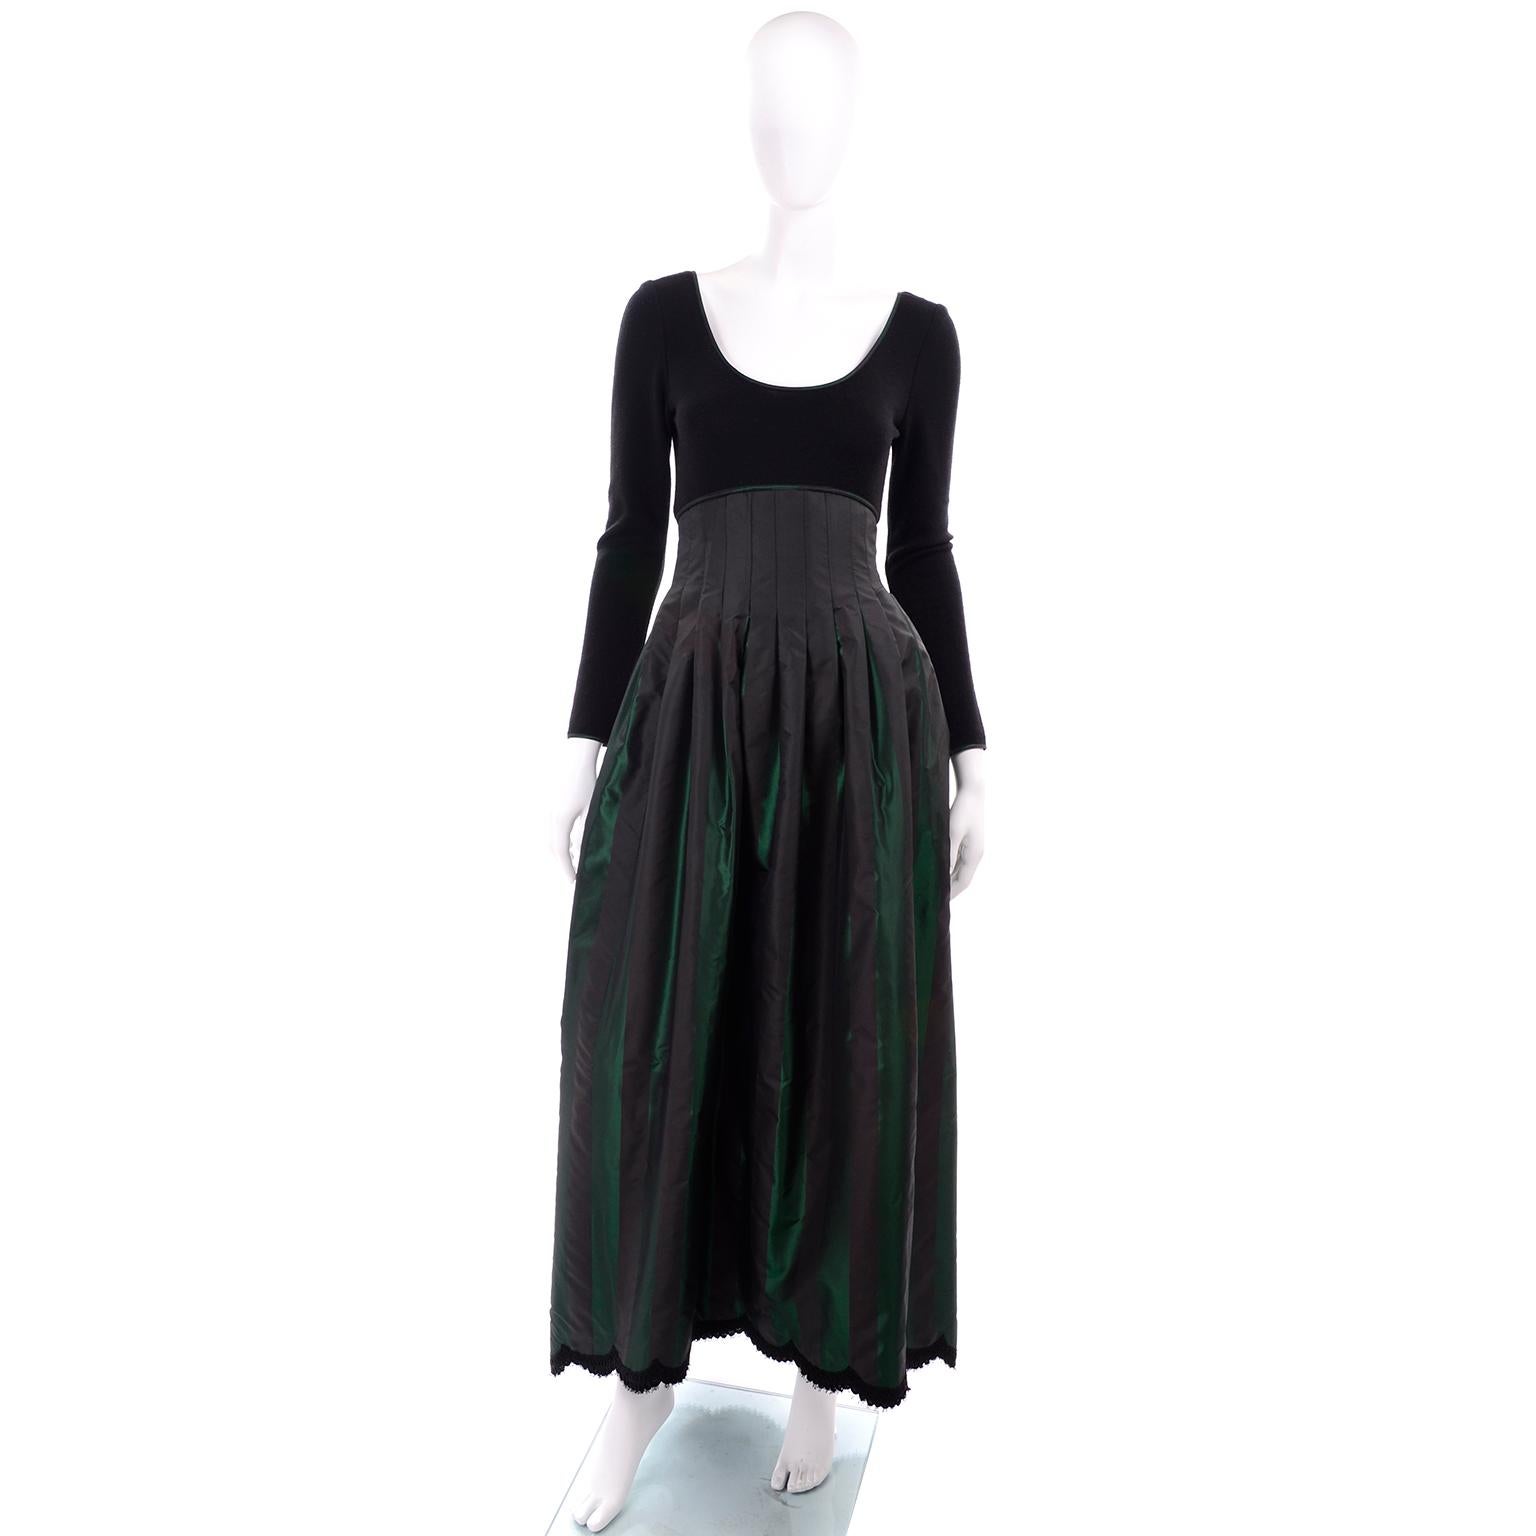 This is a stunning vintage 1980's Geoffrey Beene evening gown with a black wool knit bodice and a long skirt with an ultra high waistband in black and green striped iridescent pleated taffeta skirt with lace trim on the hem. This dress is important